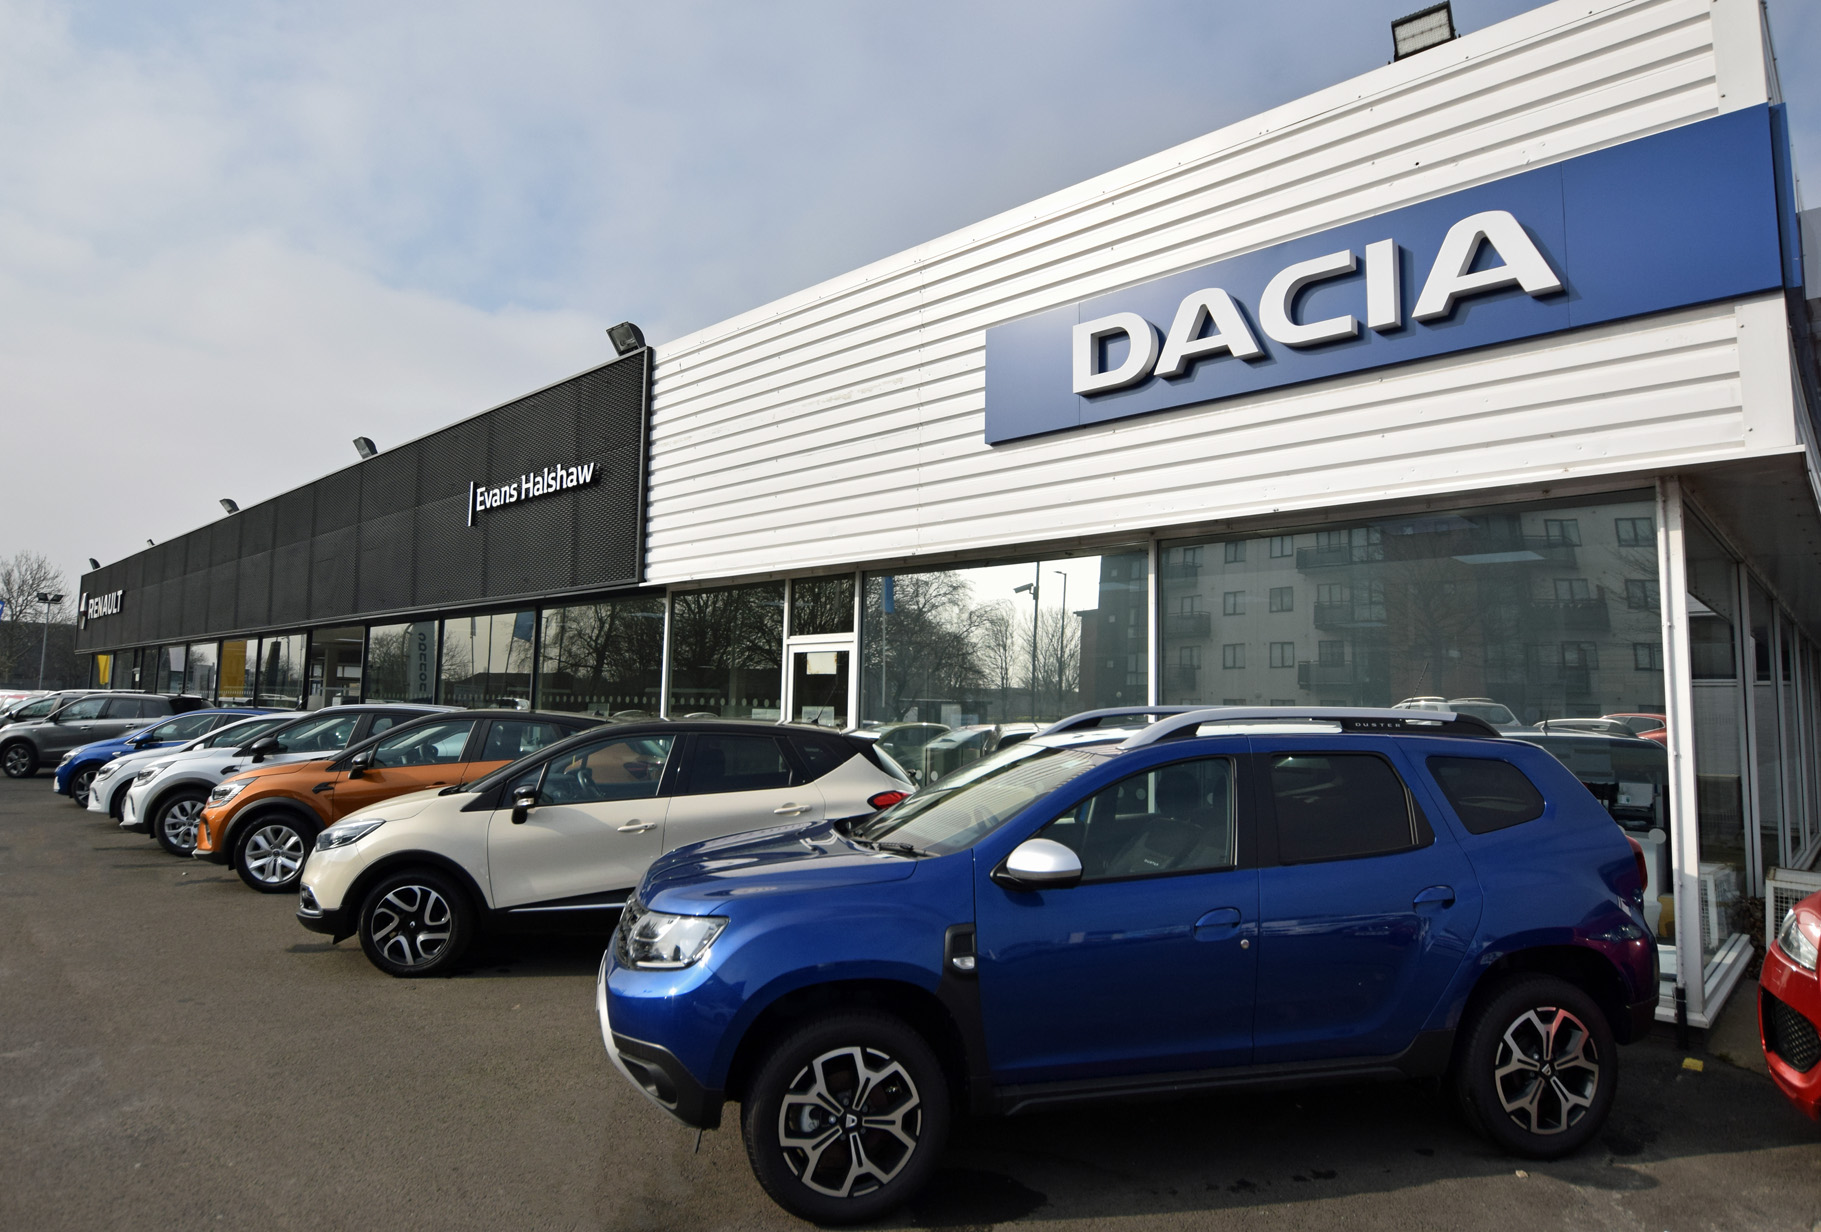 Outside the front of the Dacia Middlesbrough dealership